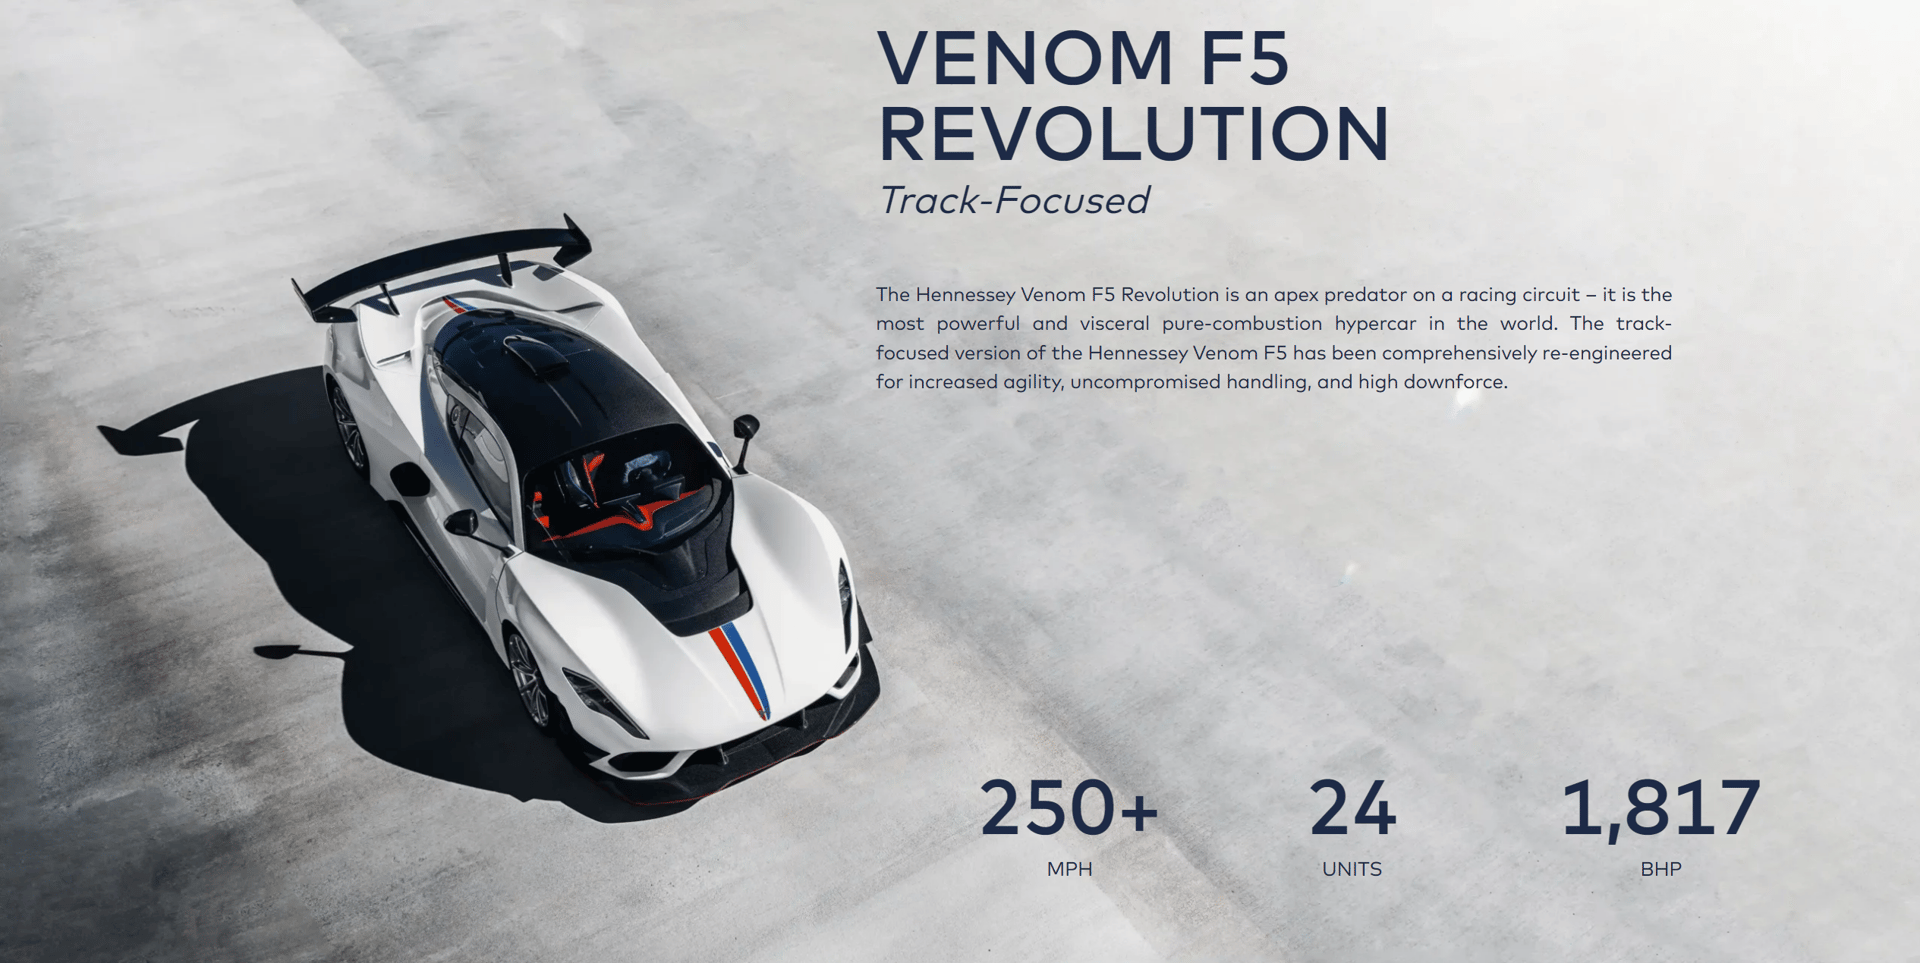 The Venom F5 Revolution is a track-ready version of Hennessey's